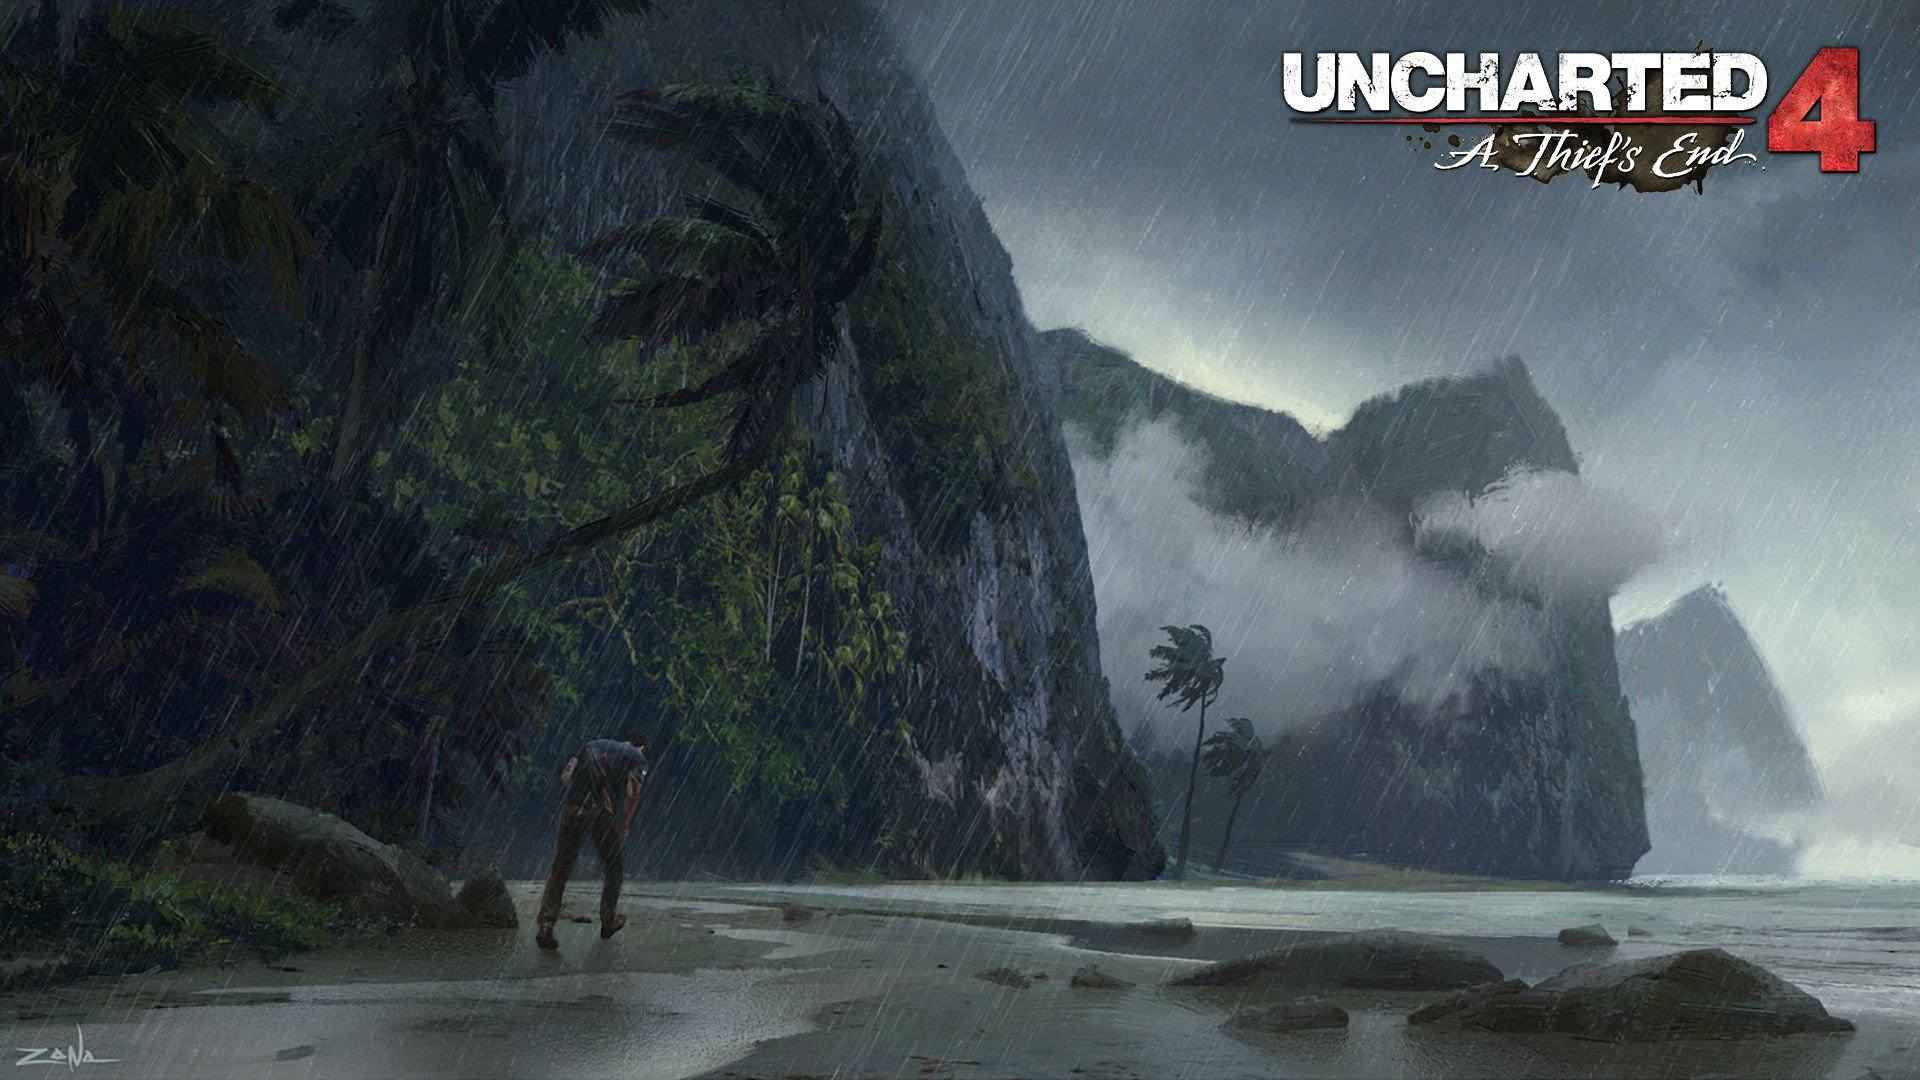 uncharted, video game, uncharted 4: a thief's end, nathan drake mobile wallpaper